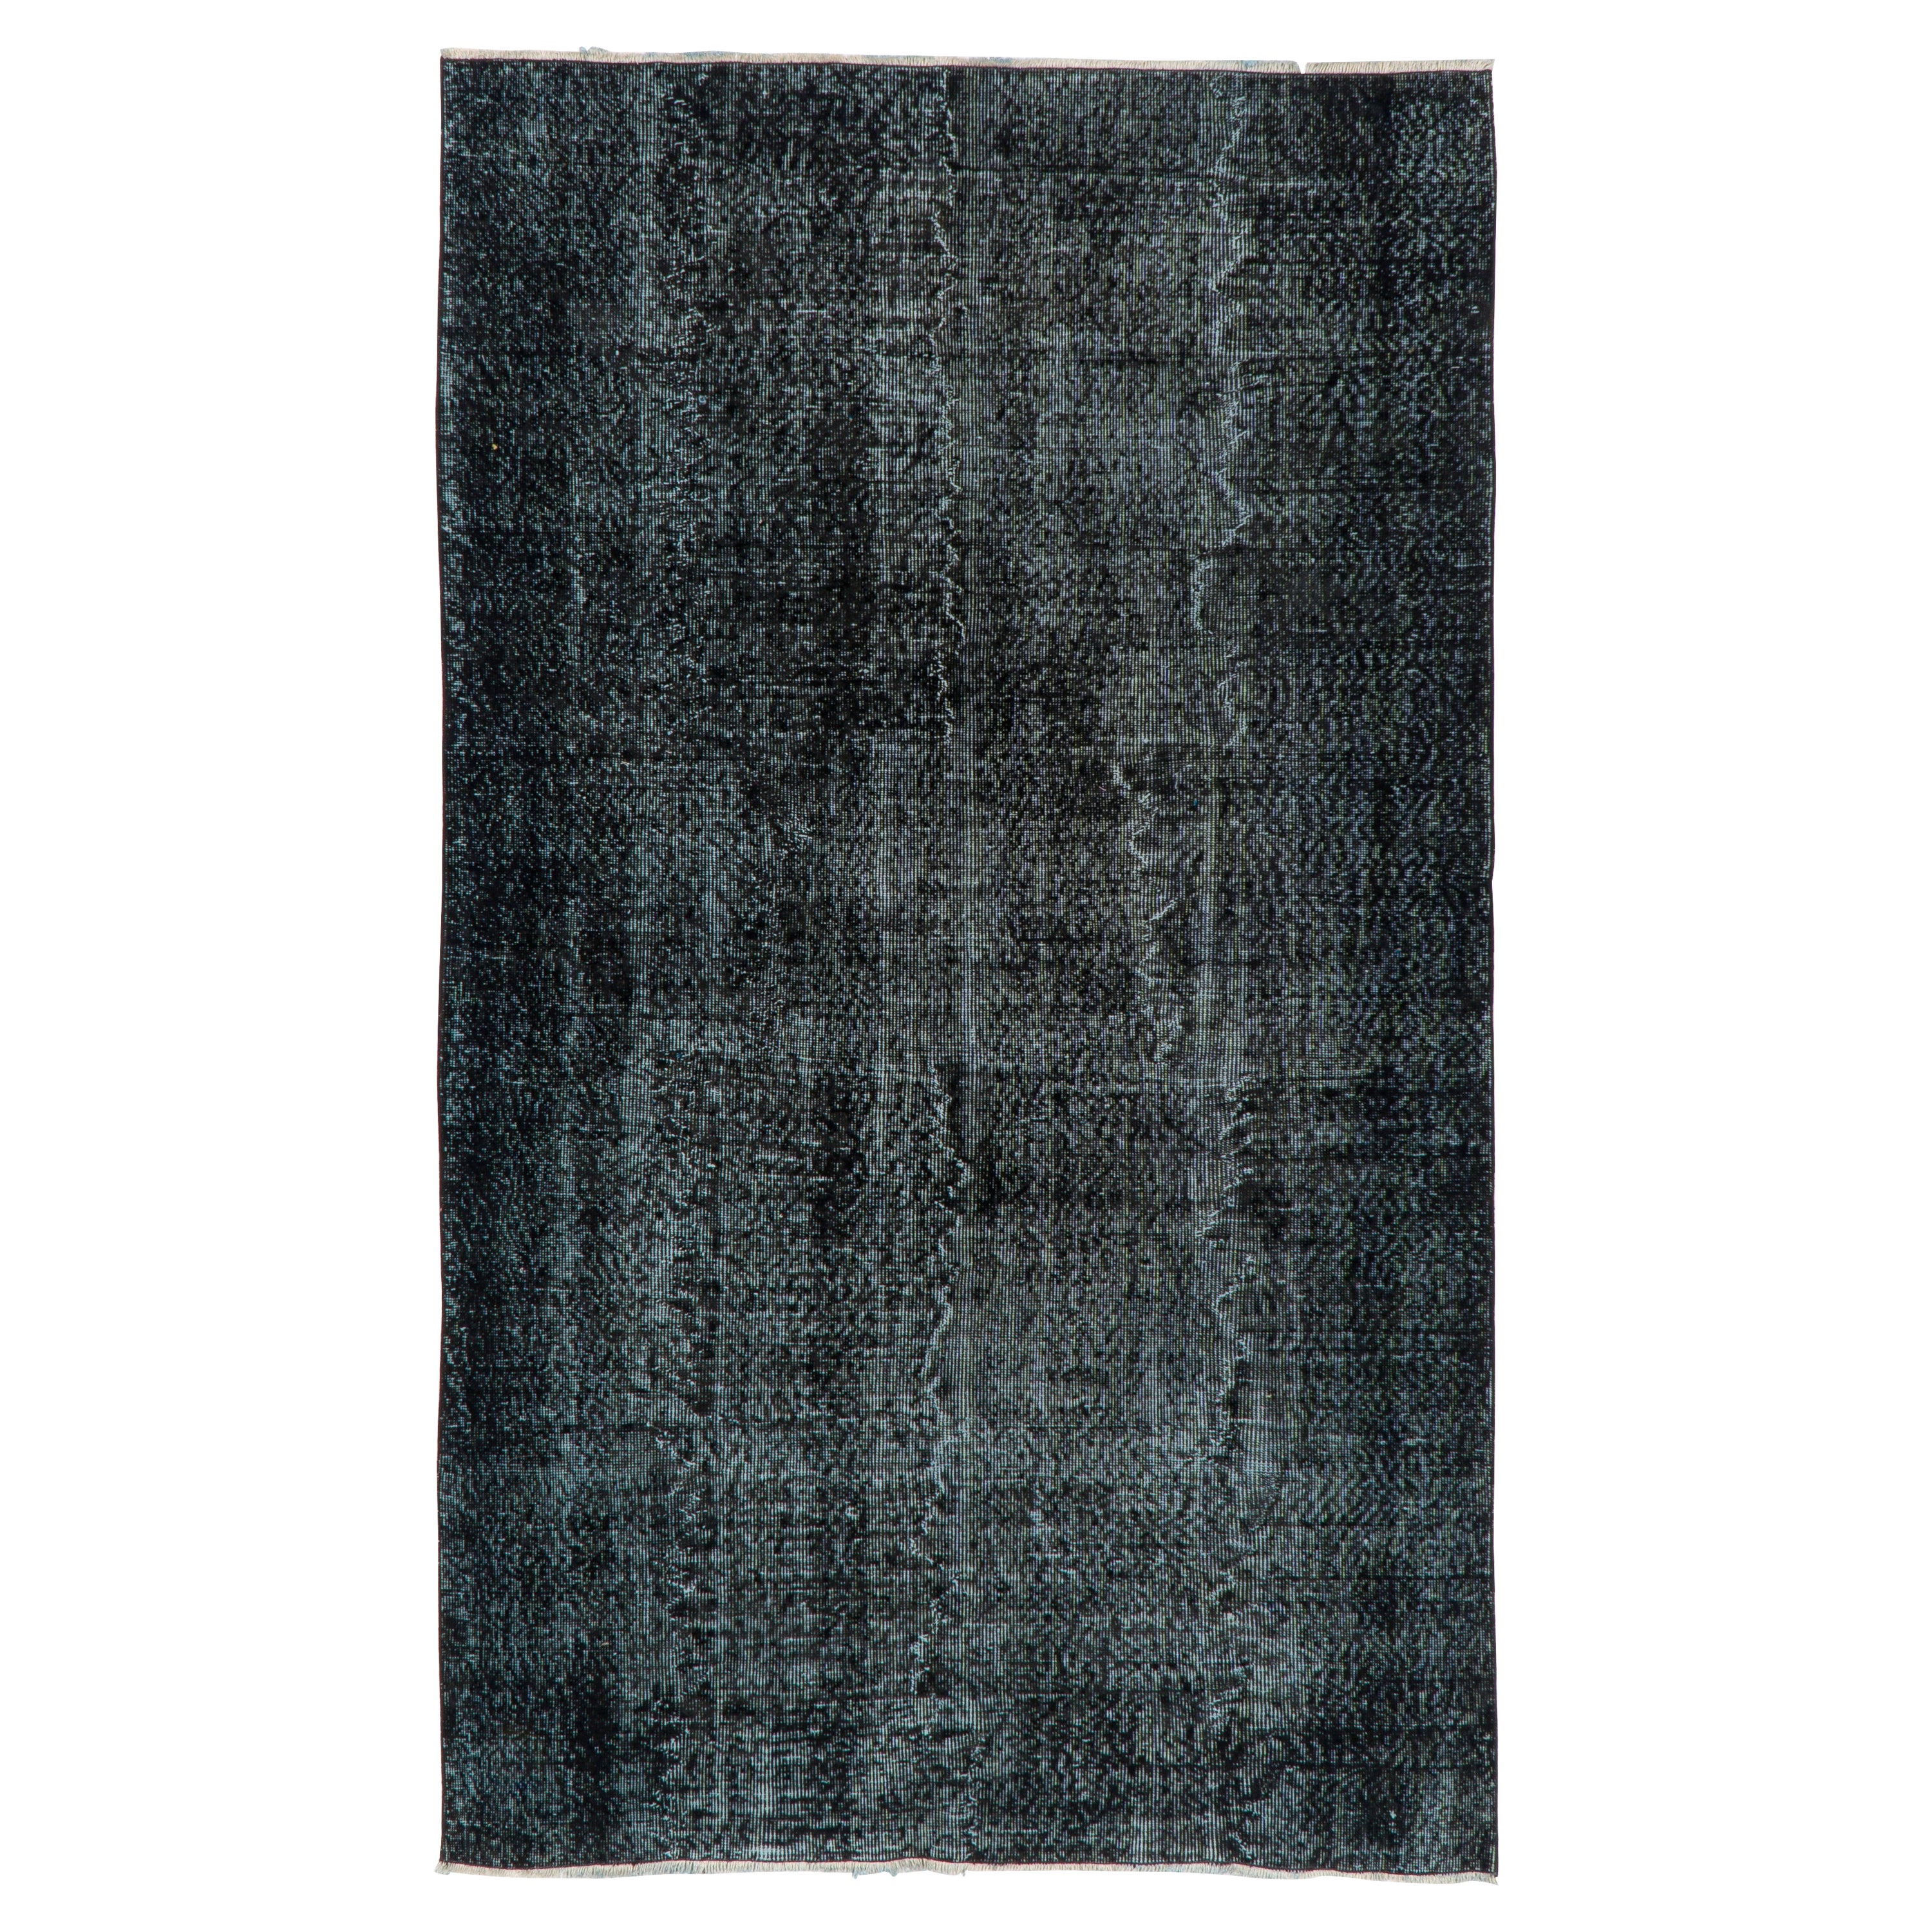 5.2x8.8 Ft Vintage Area Rug Over-Dyed in Charcoal Gray 4 Modern Home & Office For Sale